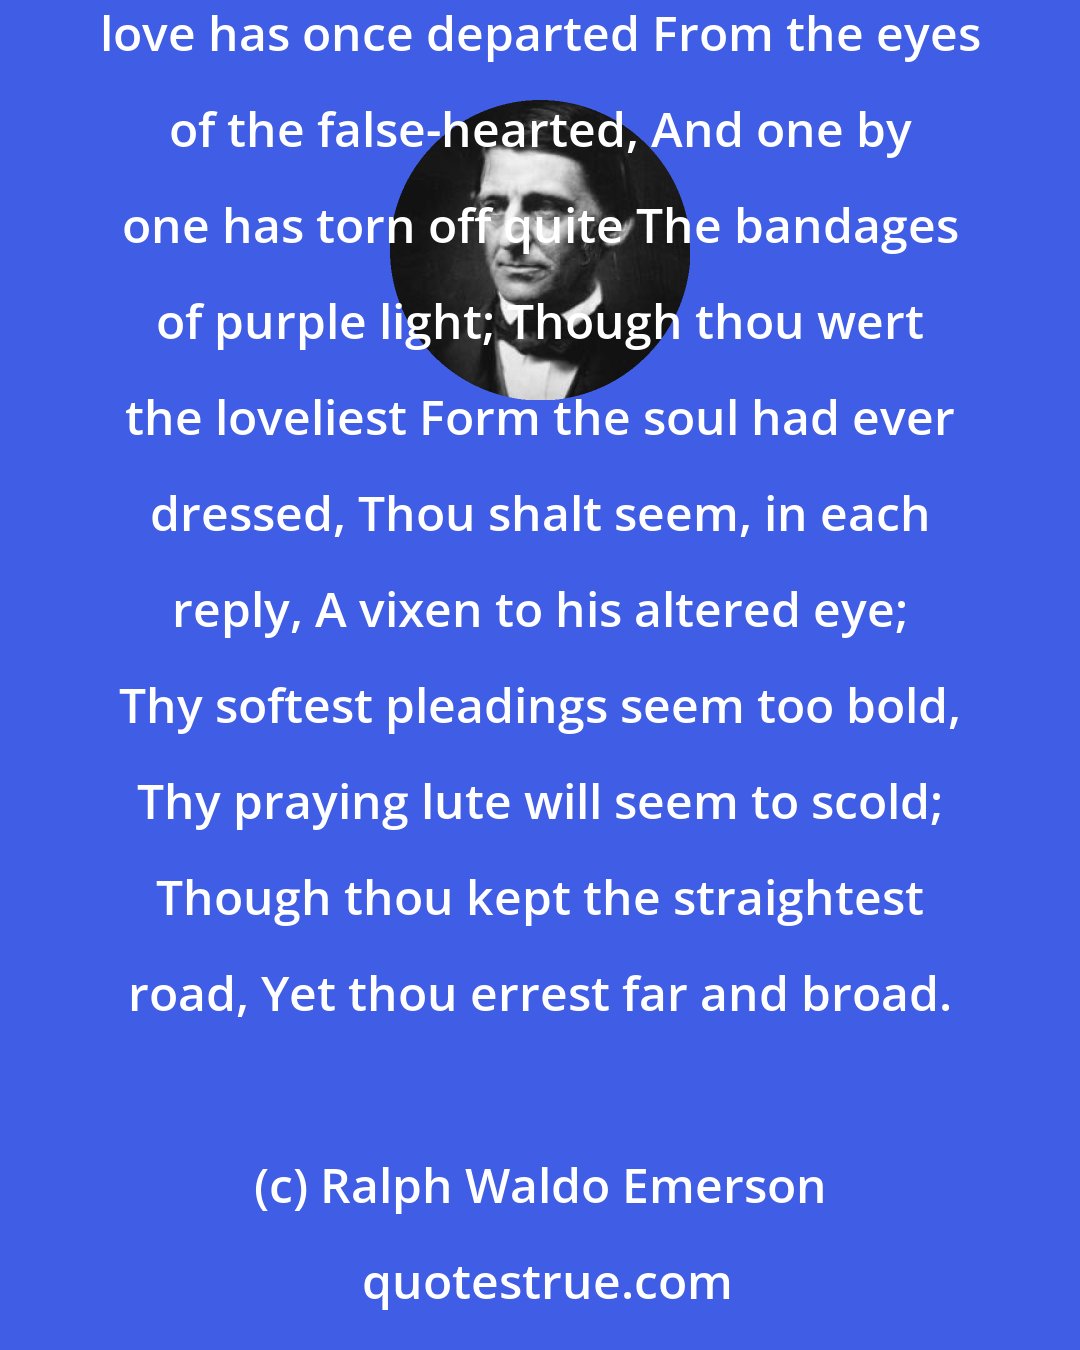 Ralph Waldo Emerson: If with love thy heart has burned; If thy love is unreturned; Hide thy grief within thy breast, Though it tear thee unexpressed; For when love has once departed From the eyes of the false-hearted, And one by one has torn off quite The bandages of purple light; Though thou wert the loveliest Form the soul had ever dressed, Thou shalt seem, in each reply, A vixen to his altered eye; Thy softest pleadings seem too bold, Thy praying lute will seem to scold; Though thou kept the straightest road, Yet thou errest far and broad.